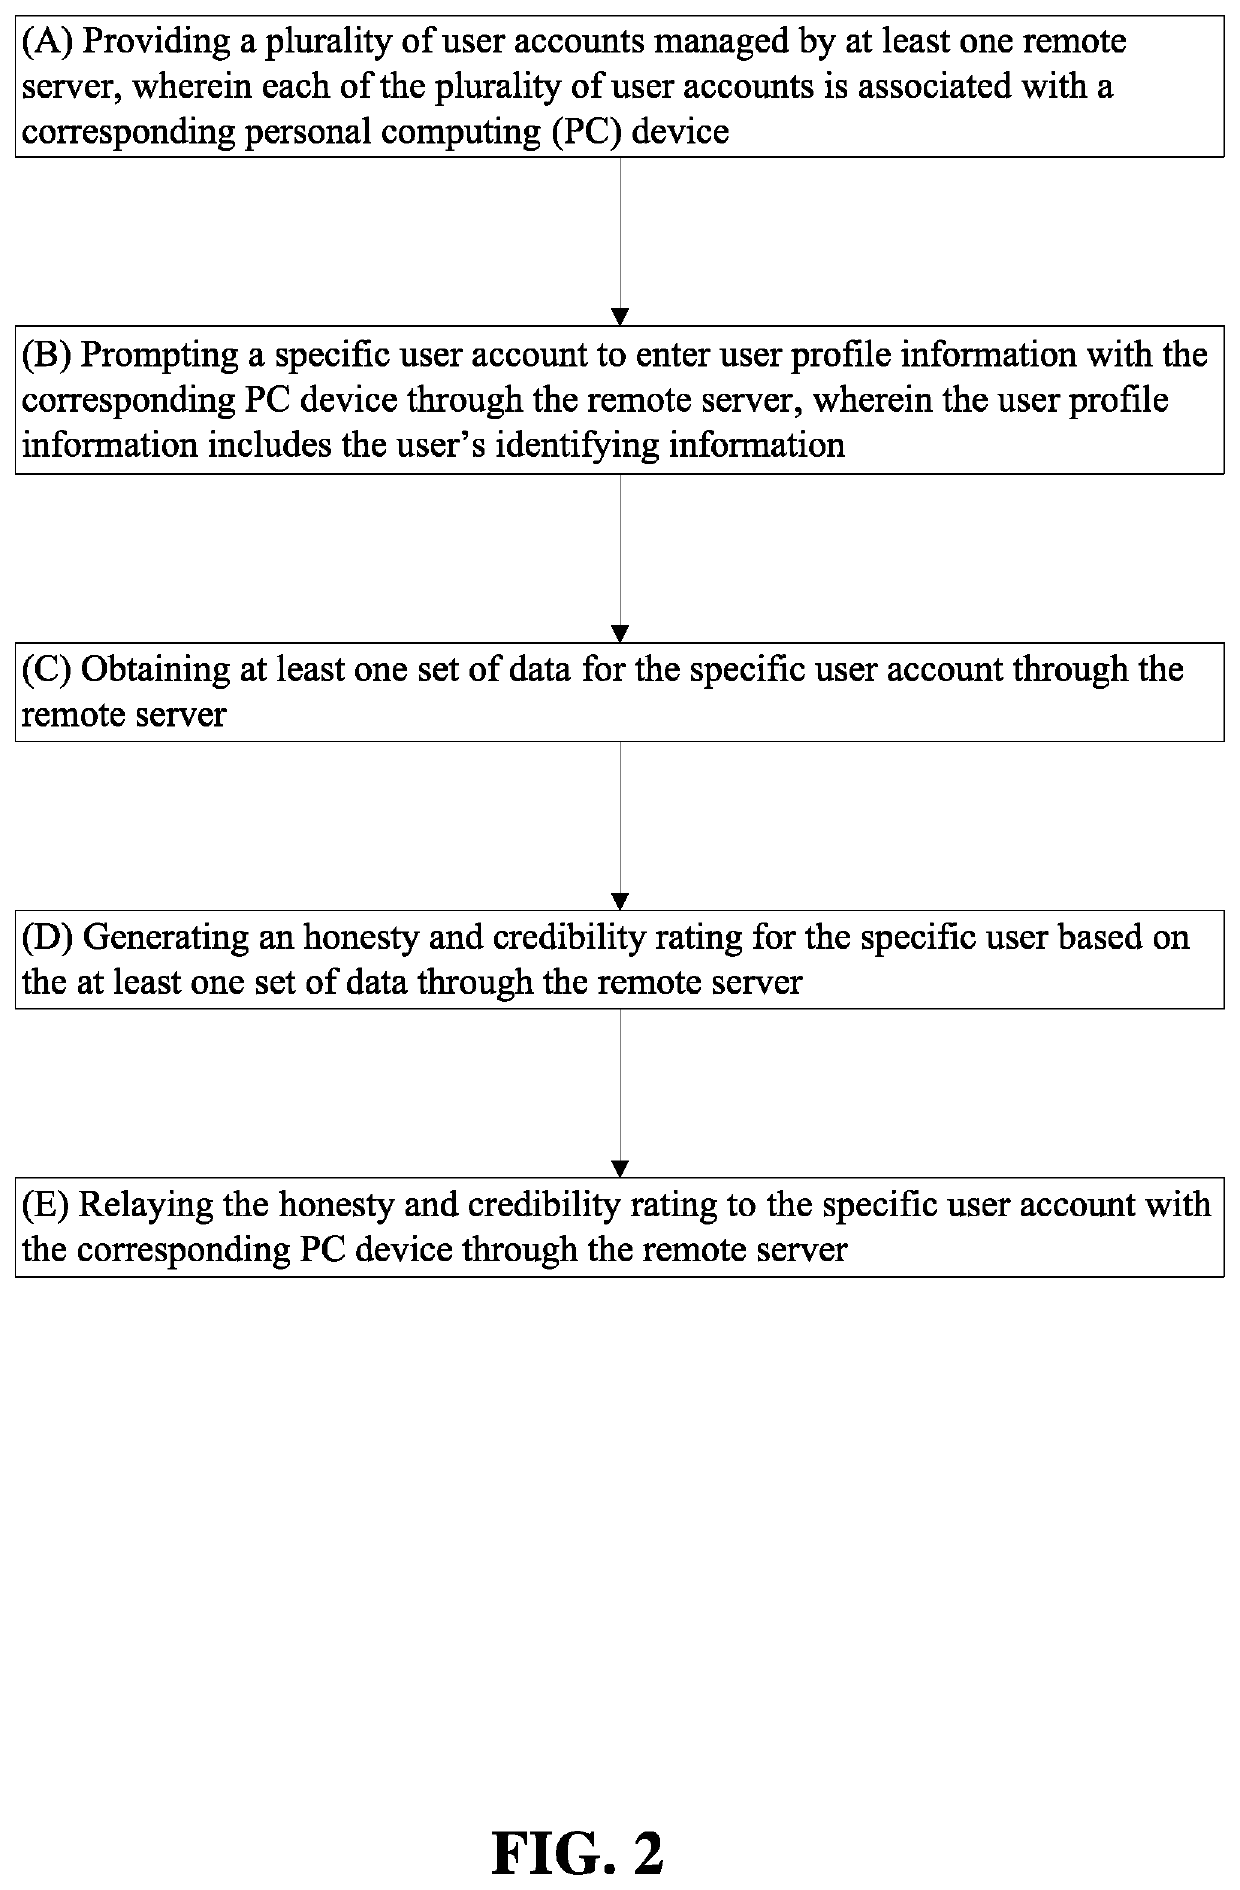 Method for Creating and Using an Honesty and Credibility Rating System